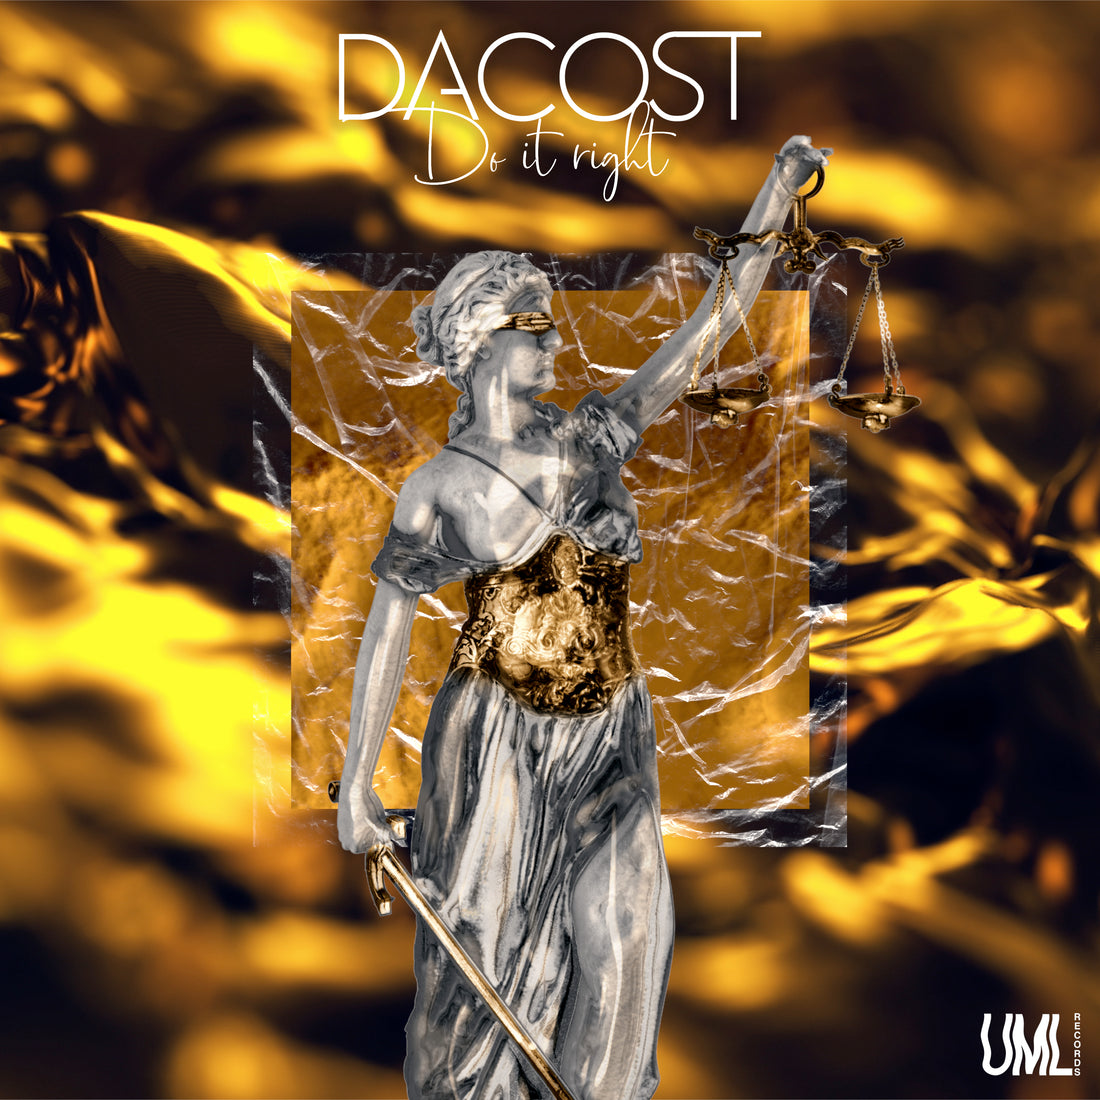 Do It Right By Dacost